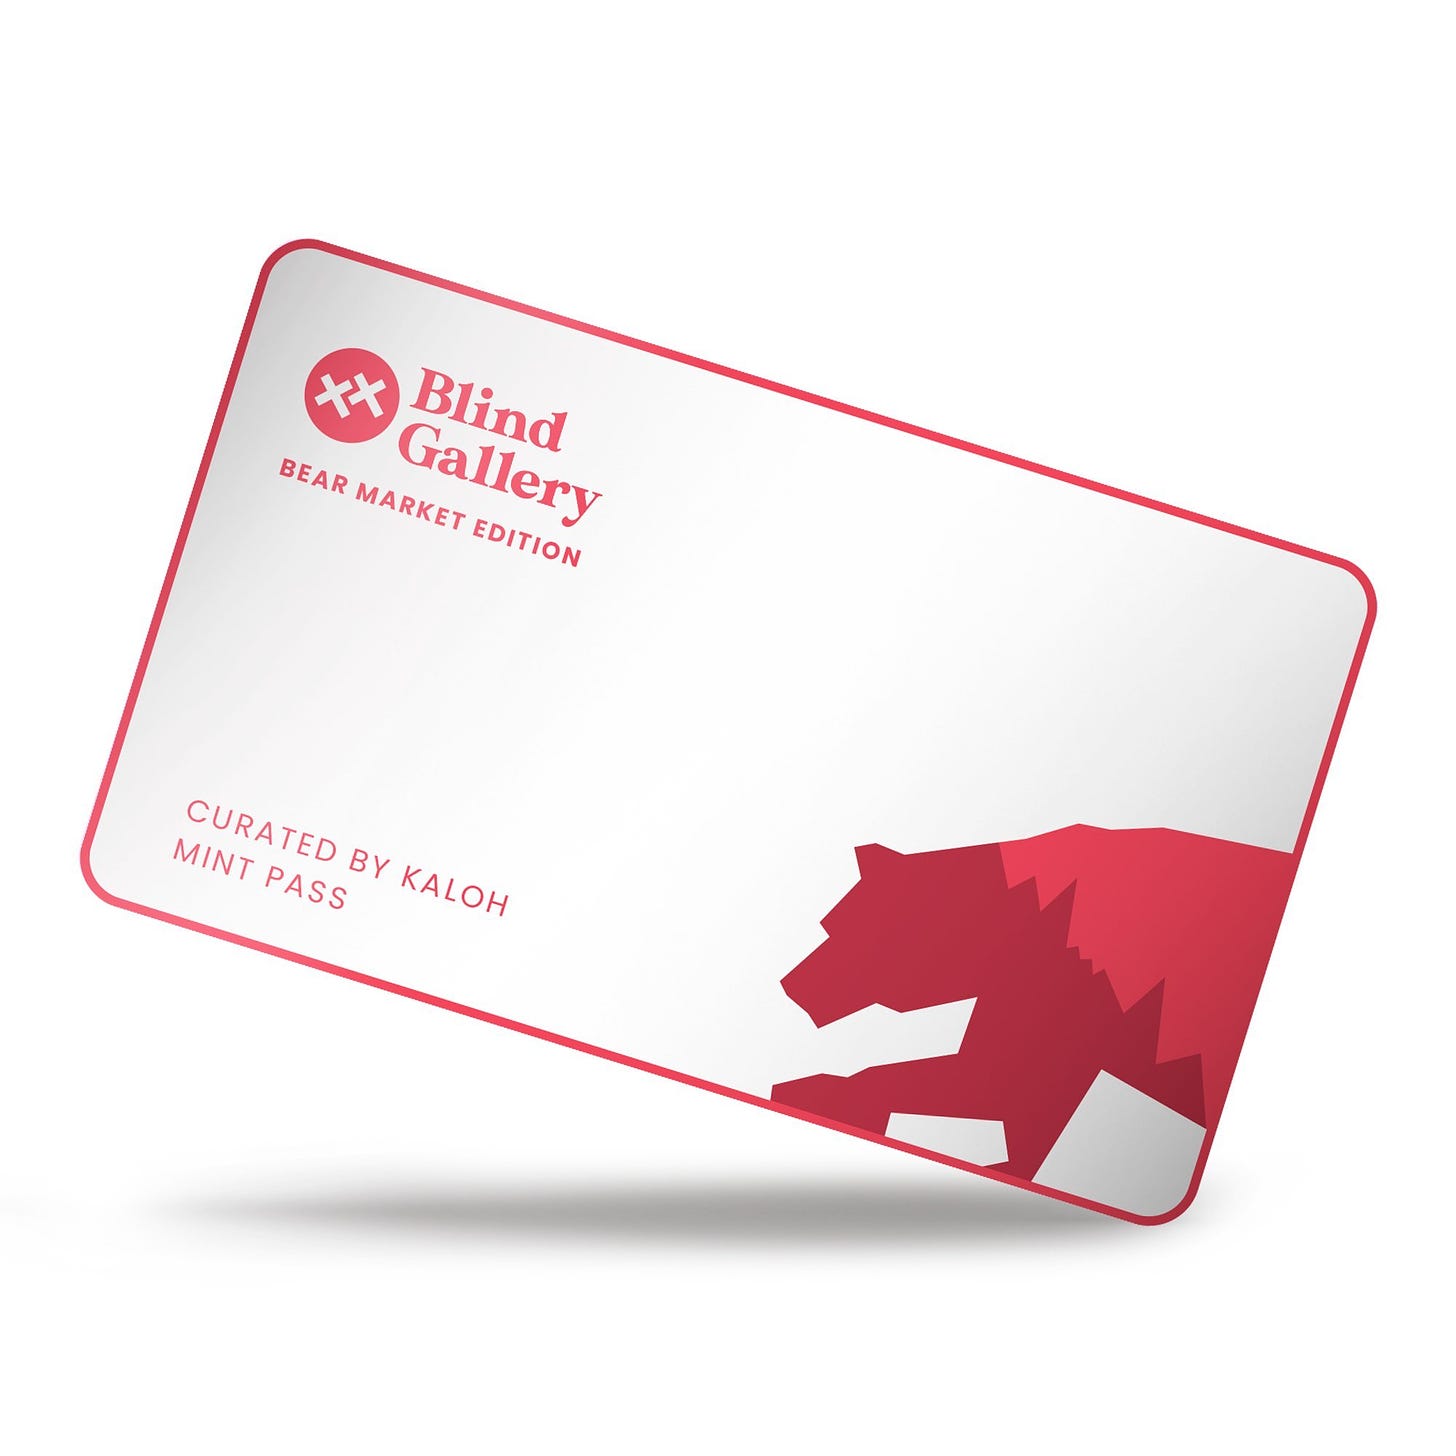 The Blind Gallery - Bear Market Edition Mint Pass (designed by Datzel).